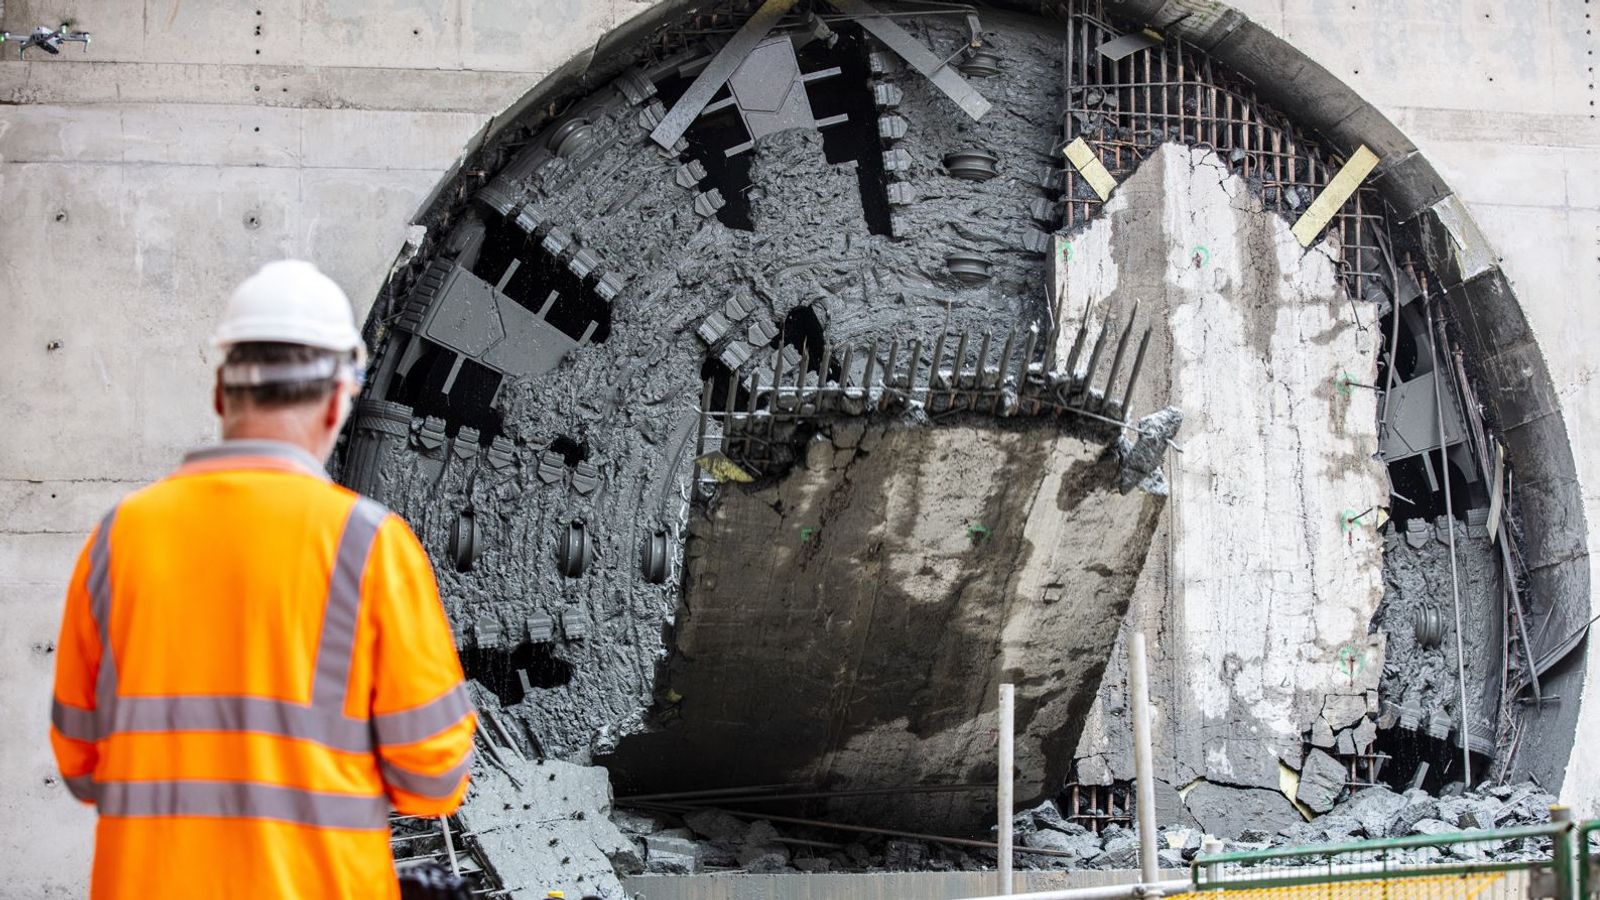 JULY 26 Undated handout photo issued by HS2 Ltd of the 2,000-tonne massive tunnel boring machine (TBM) named 'Dorothy' completing its one-mile dig under Long Itchington Wood in Warwickshire.